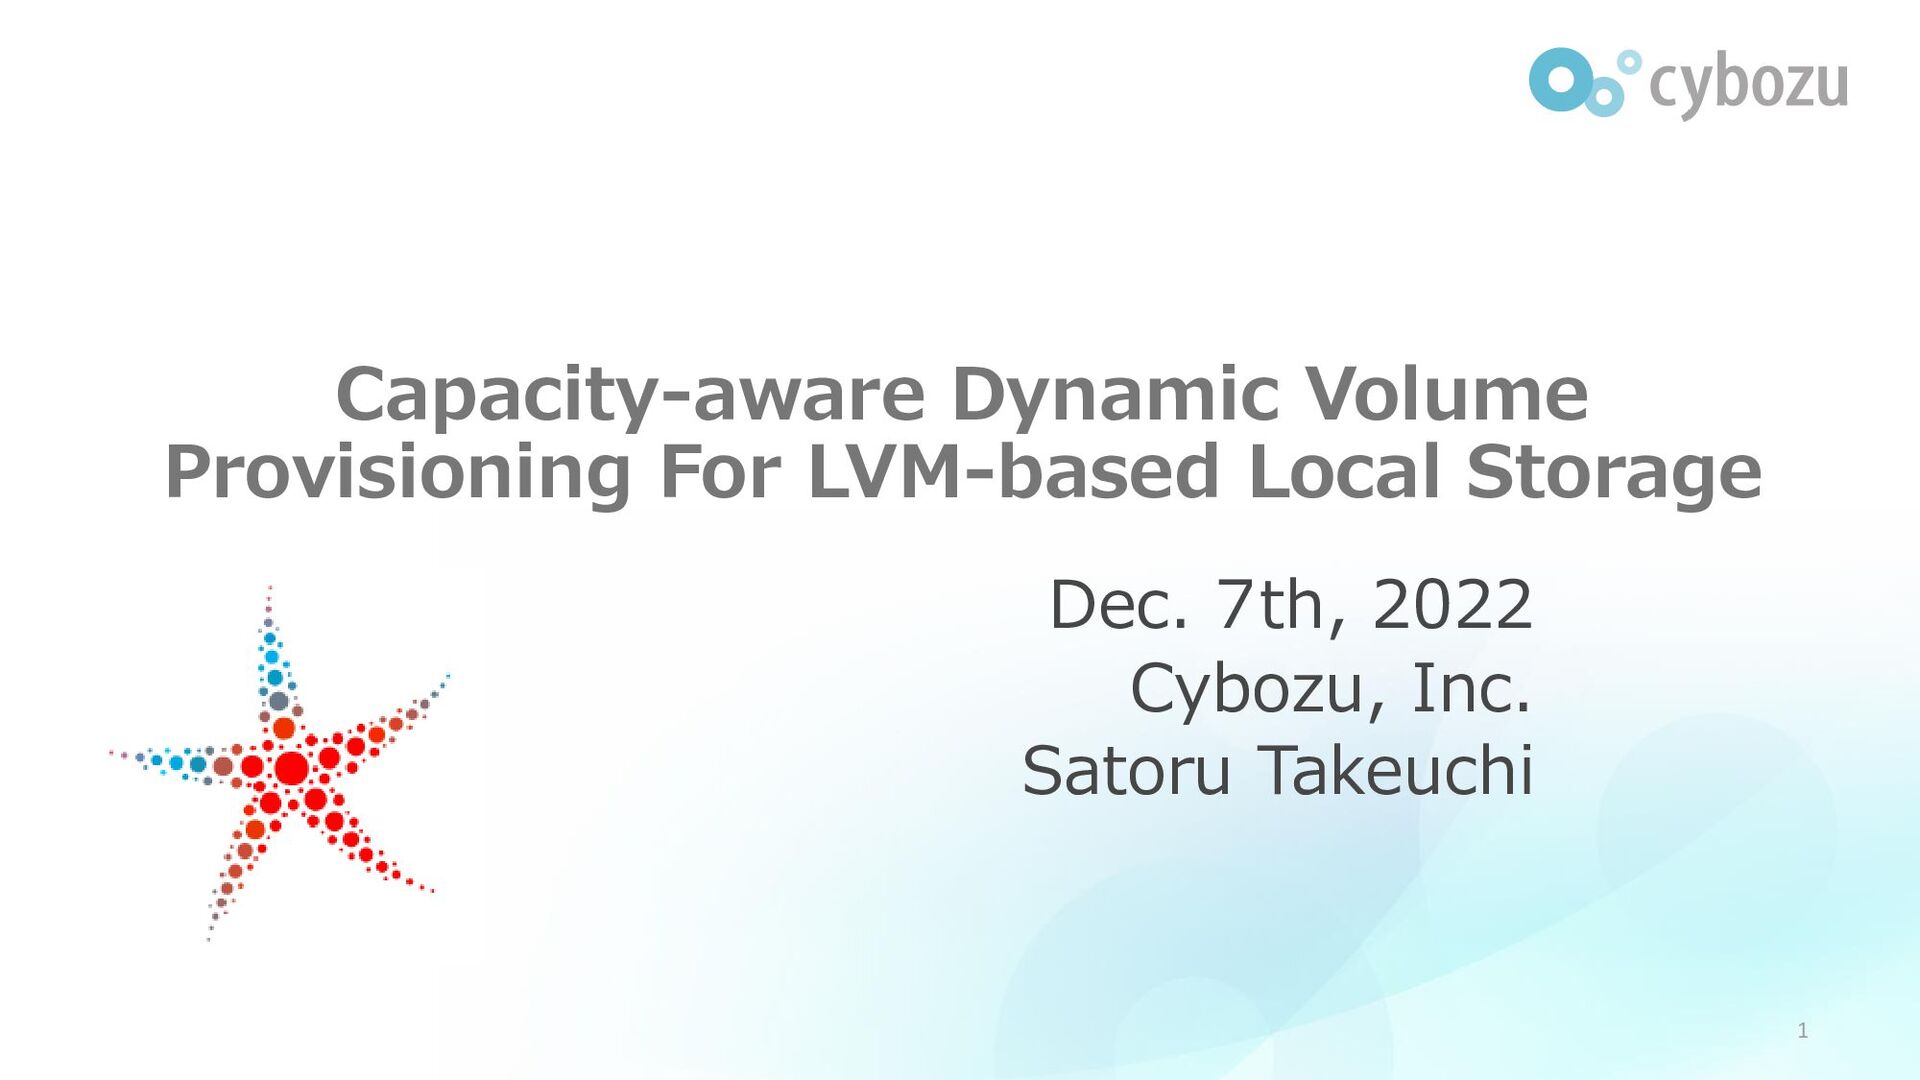 Slide Top: Capacity-aware Dynamic Volume Provisioning For LVM-based Local Storage